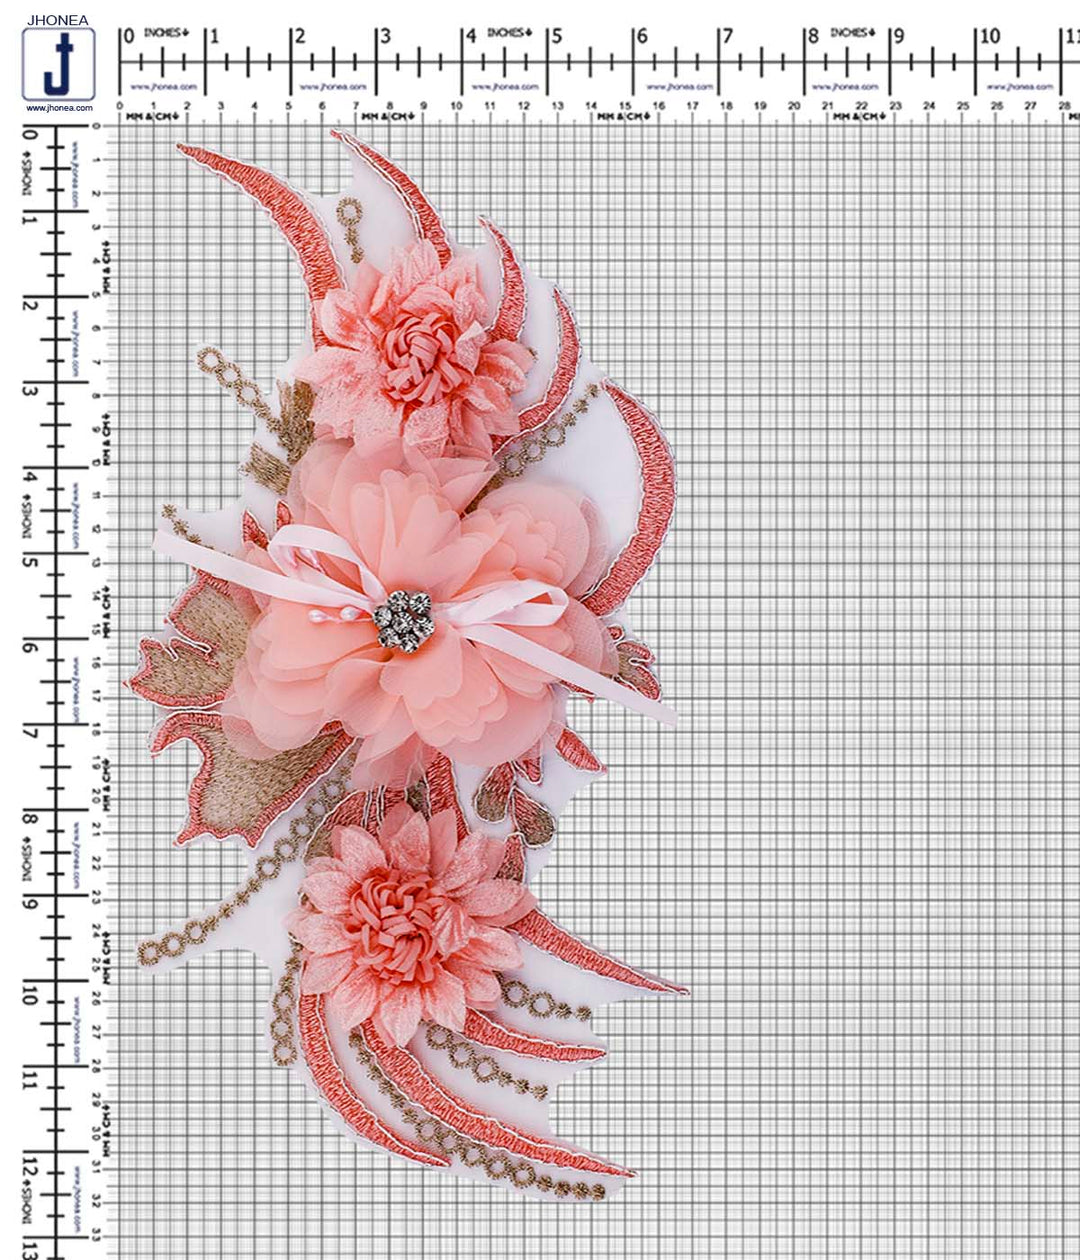 Peach with Metallic Gold Flower Embroidery Patch